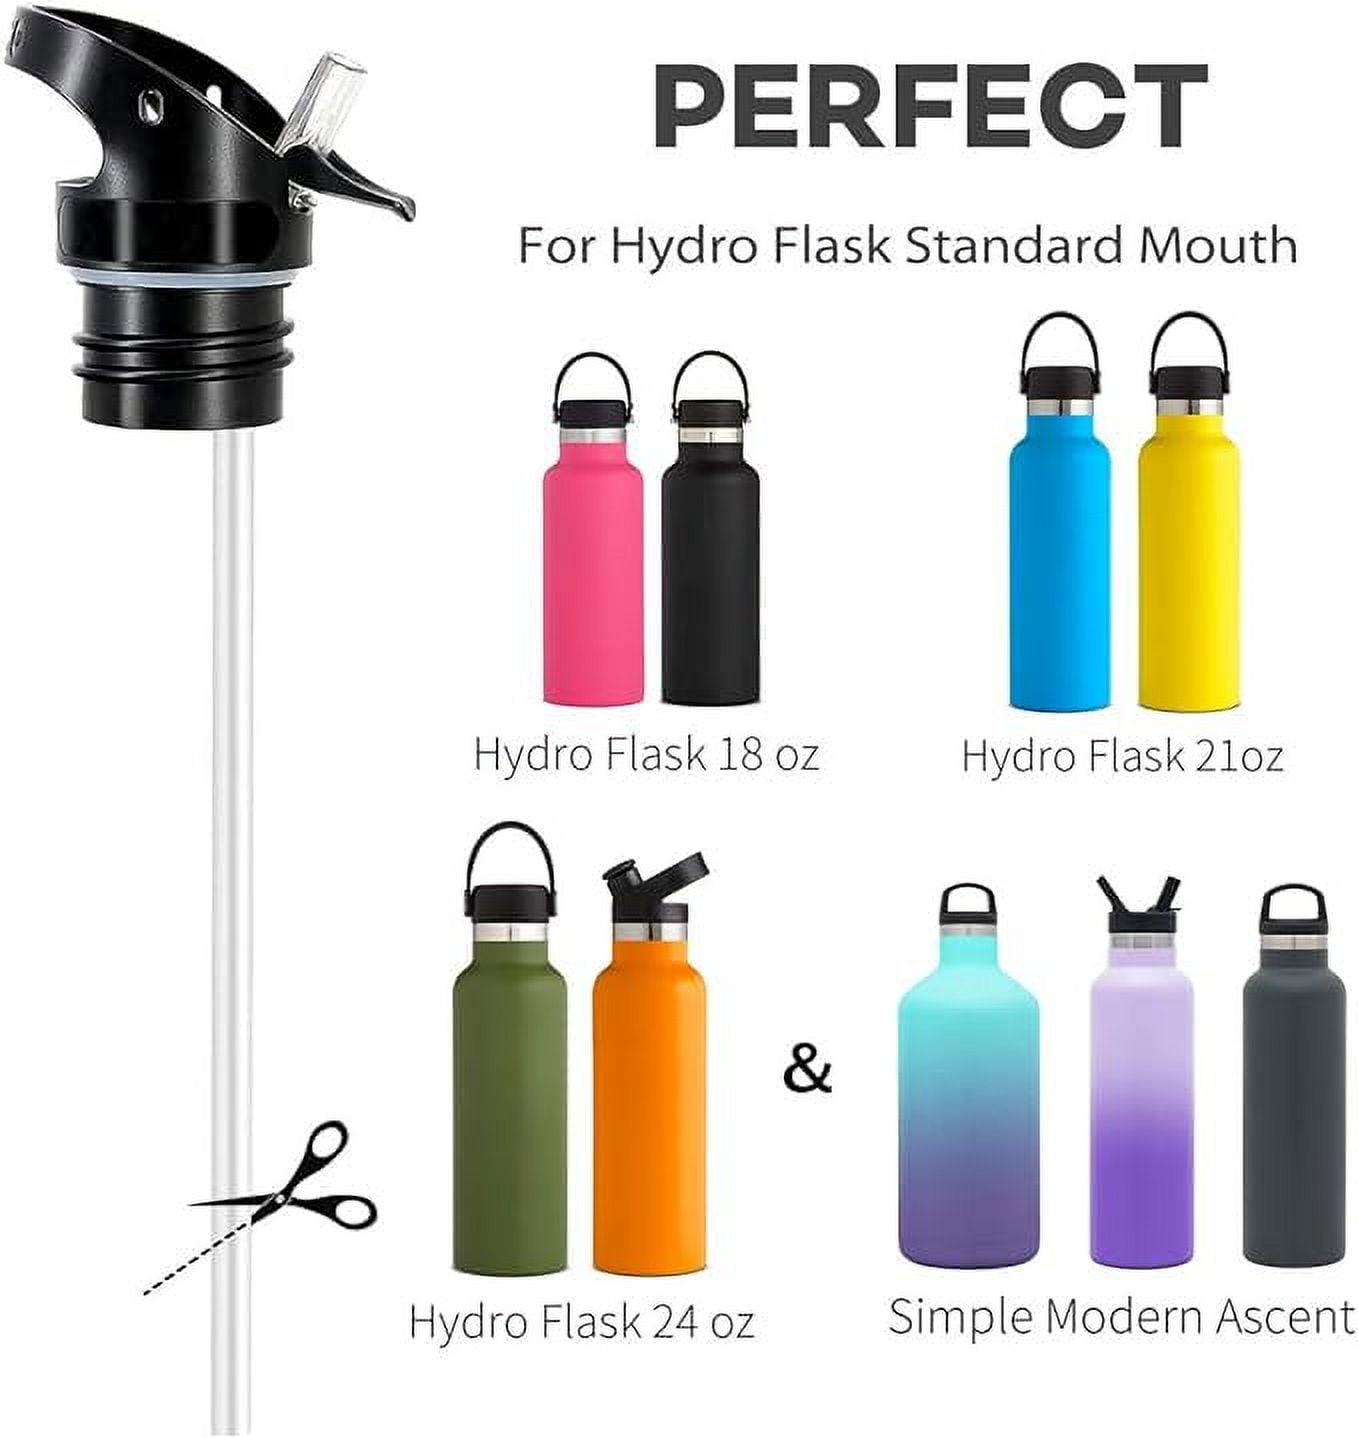 Straw Lid for Hydroflask Standard Mouth,Lid with Straws fit for Hydroflask  18 oz, 21 oz, 24 oz Standard Mouth. Straw Lid for Insulated Water Bottle  Accessories (B-1 PC) 